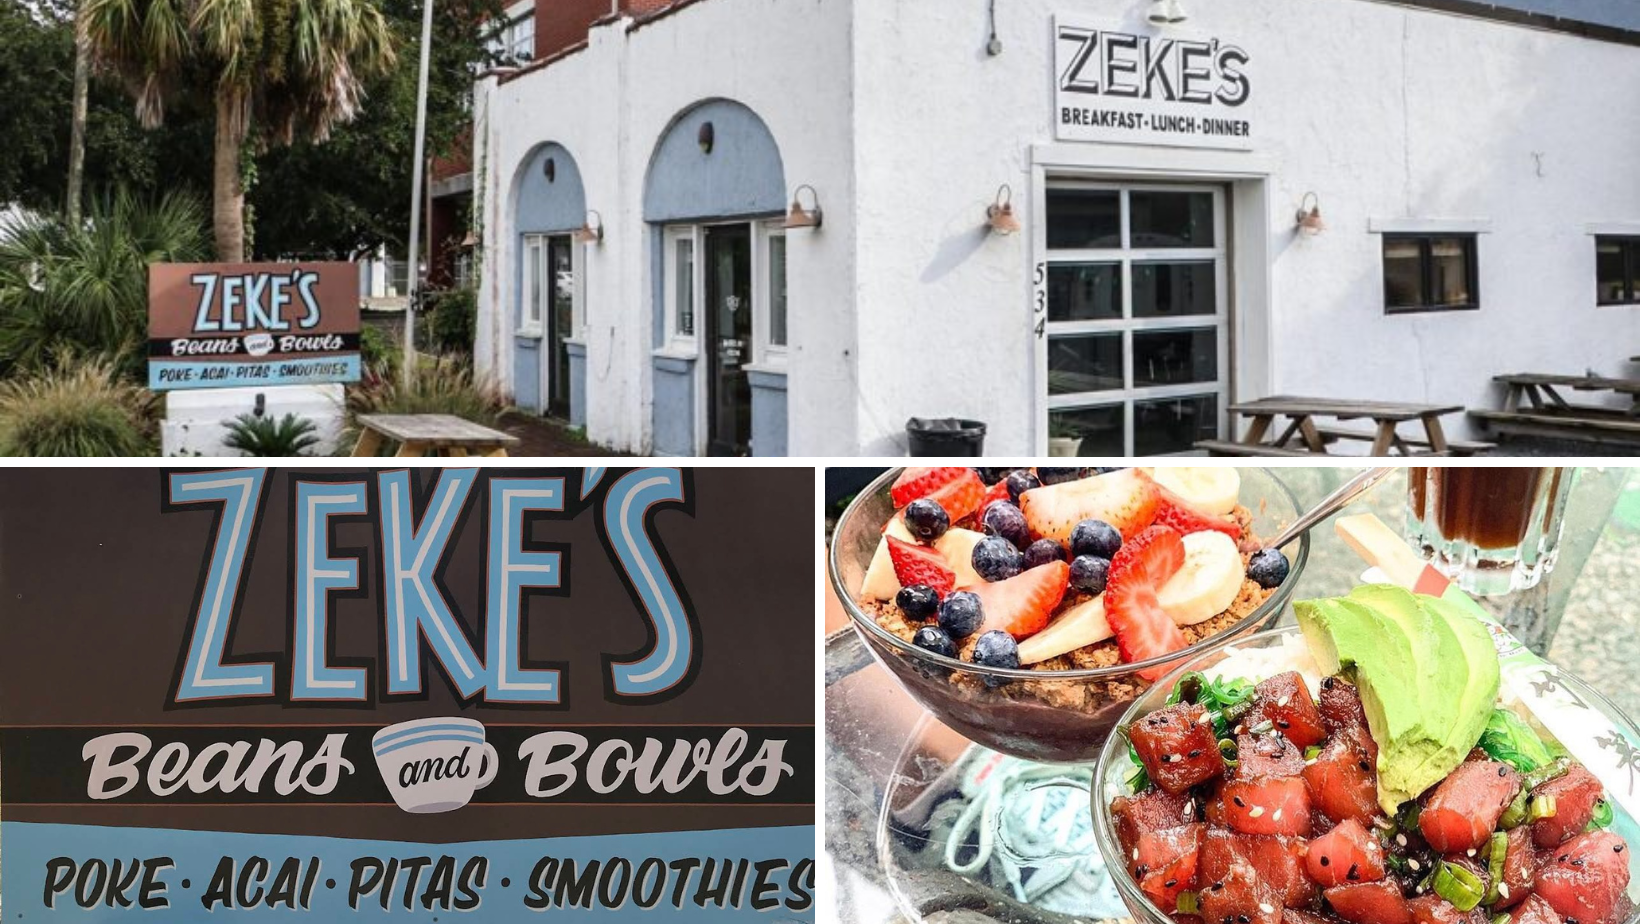 WHAT’S AROUND THE CORNER FROM AIRLIE AT WRIGHTSVILLE SOUND:  Zeke’s Beans and Bowls